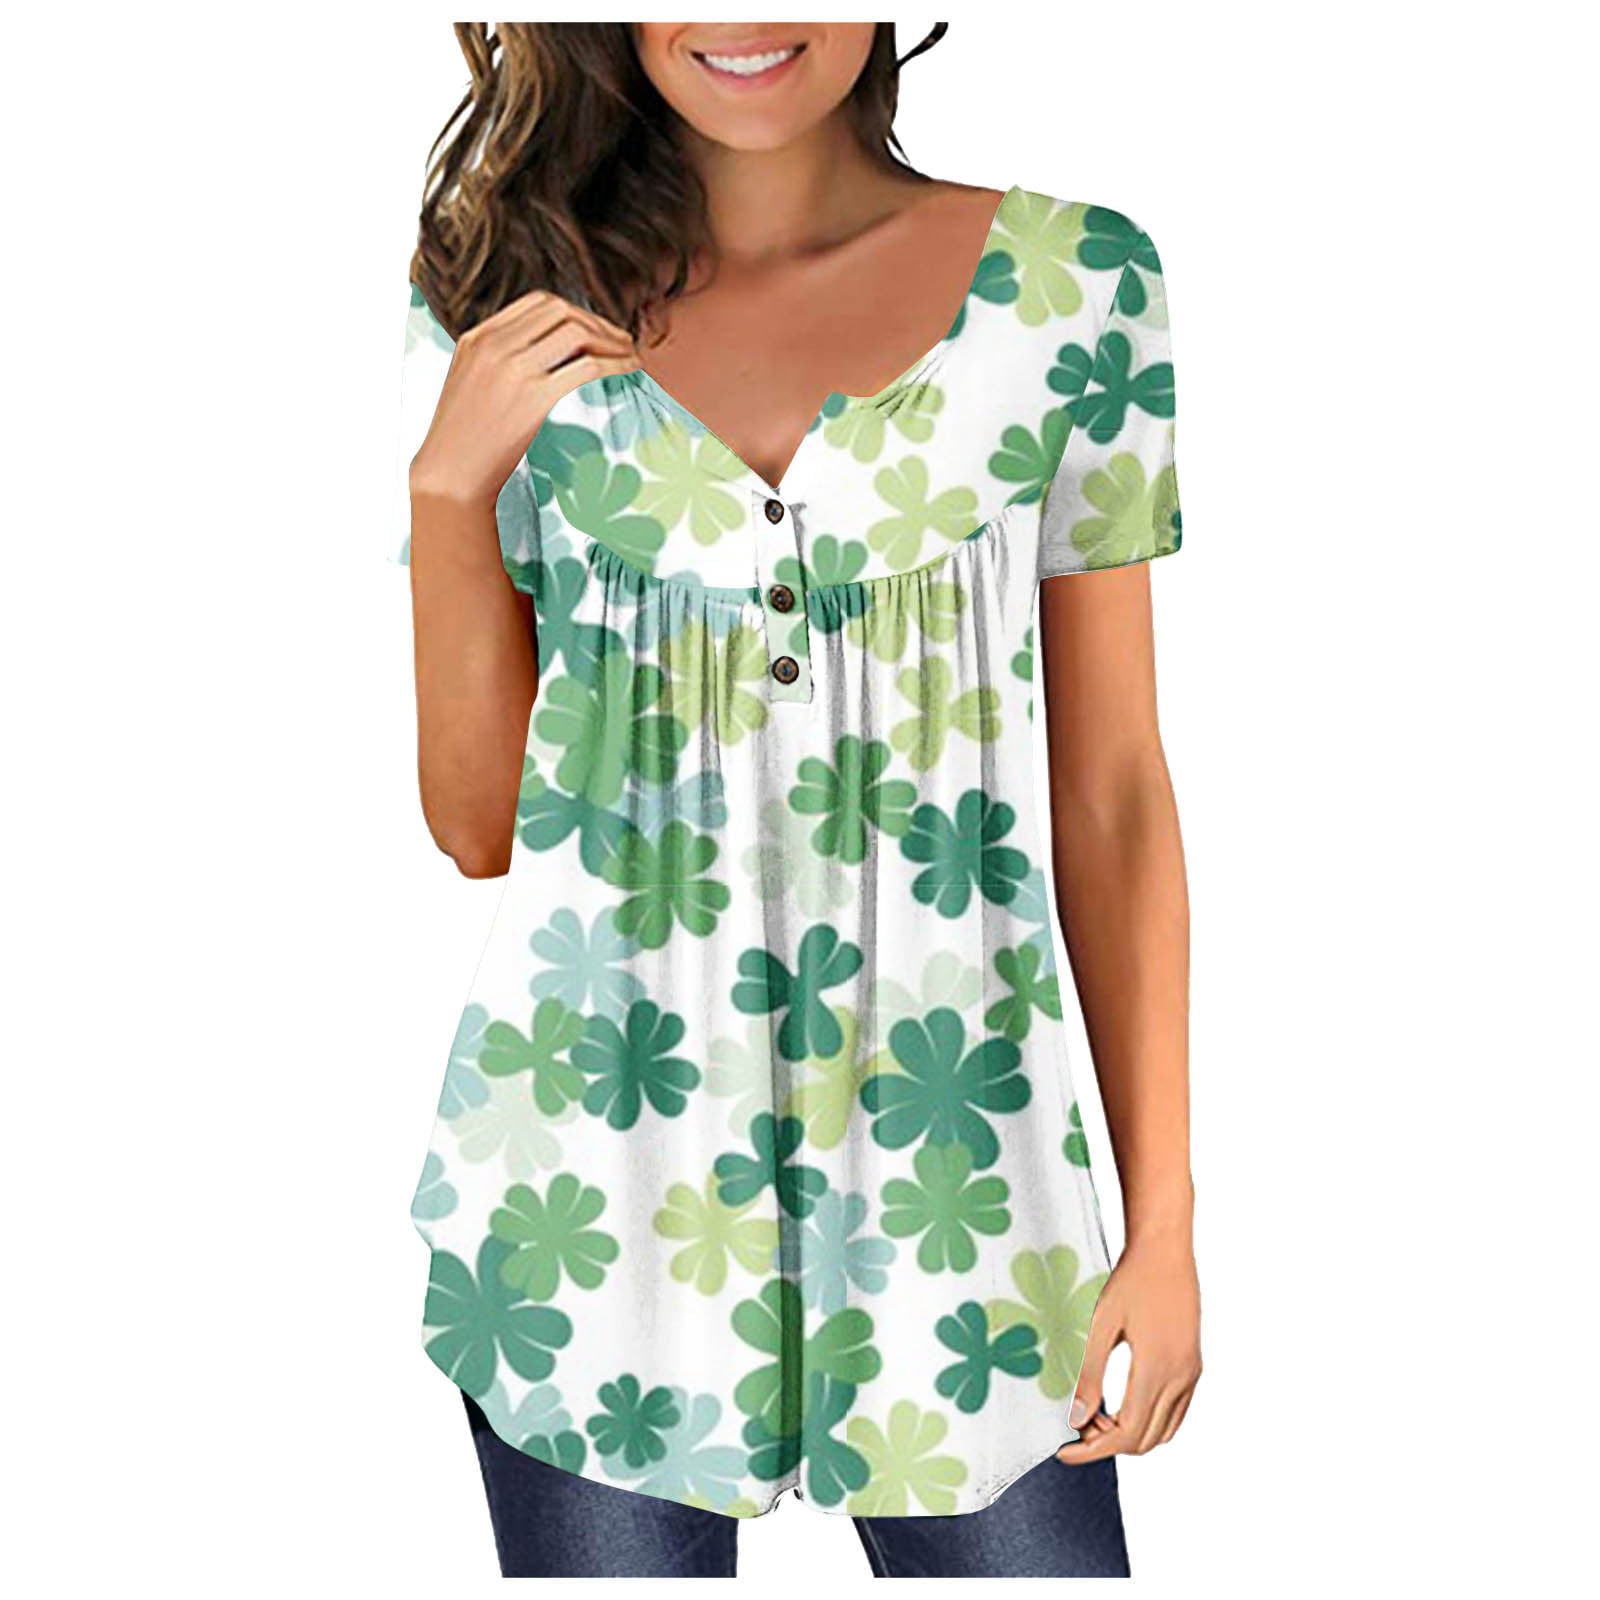 Olyvenn Clearance Tunic T Shirts for Women thick thighs lucky